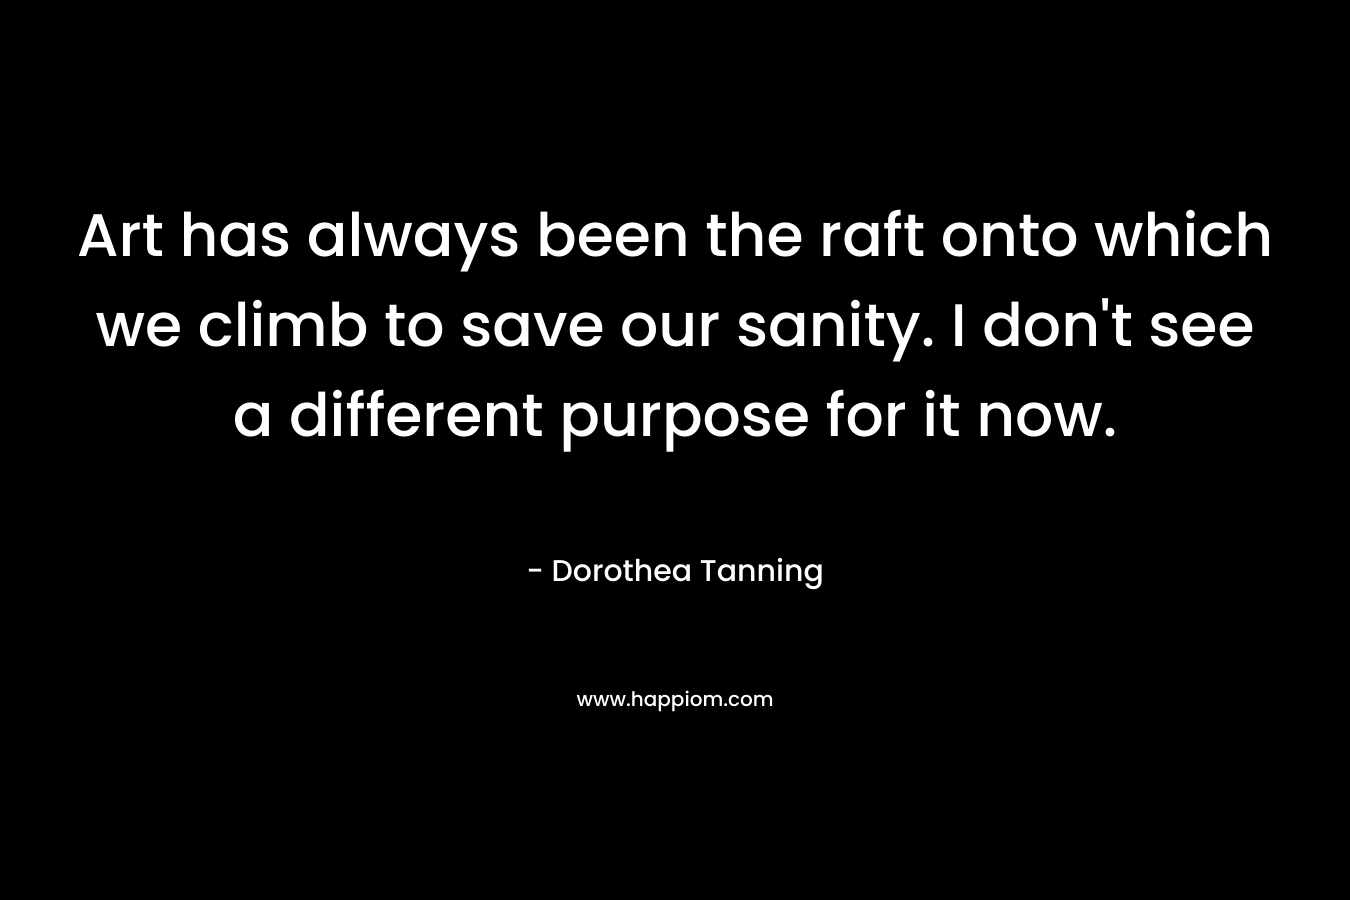 Art has always been the raft onto which we climb to save our sanity. I don’t see a different purpose for it now. – Dorothea Tanning